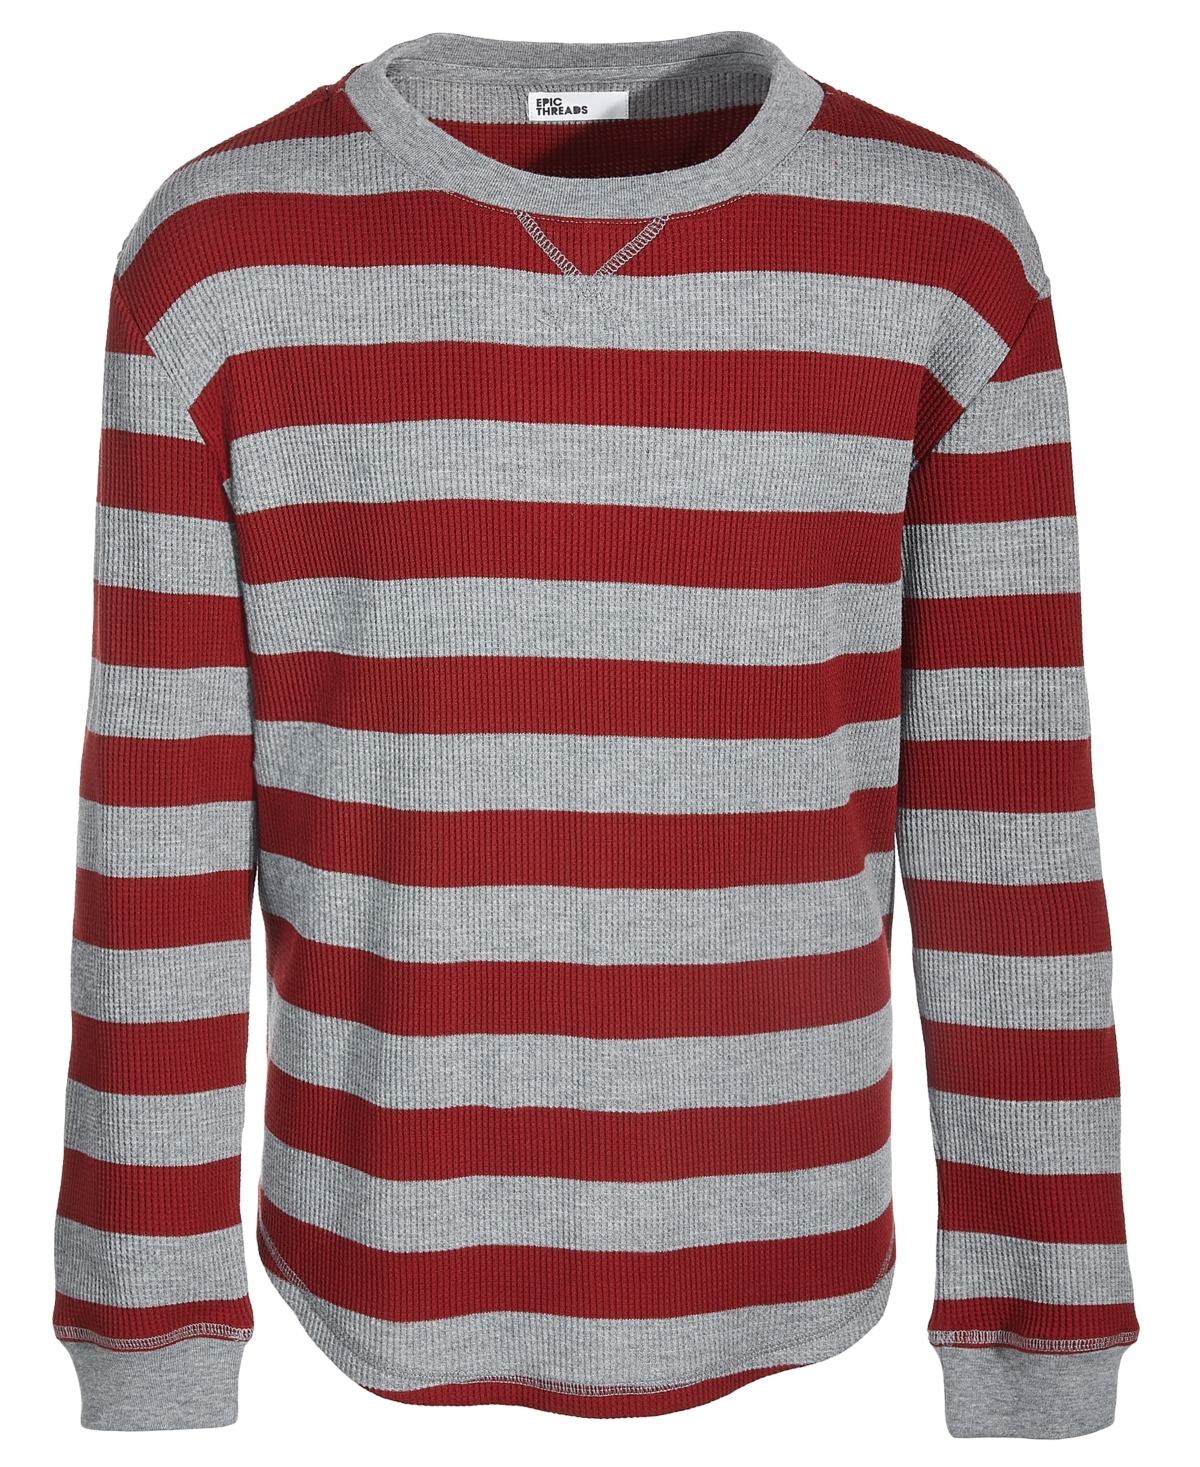 EPIC THREADS BIG BOYS STRIPED THERMAL T-SHIRT, CREATED FOR MACY'S